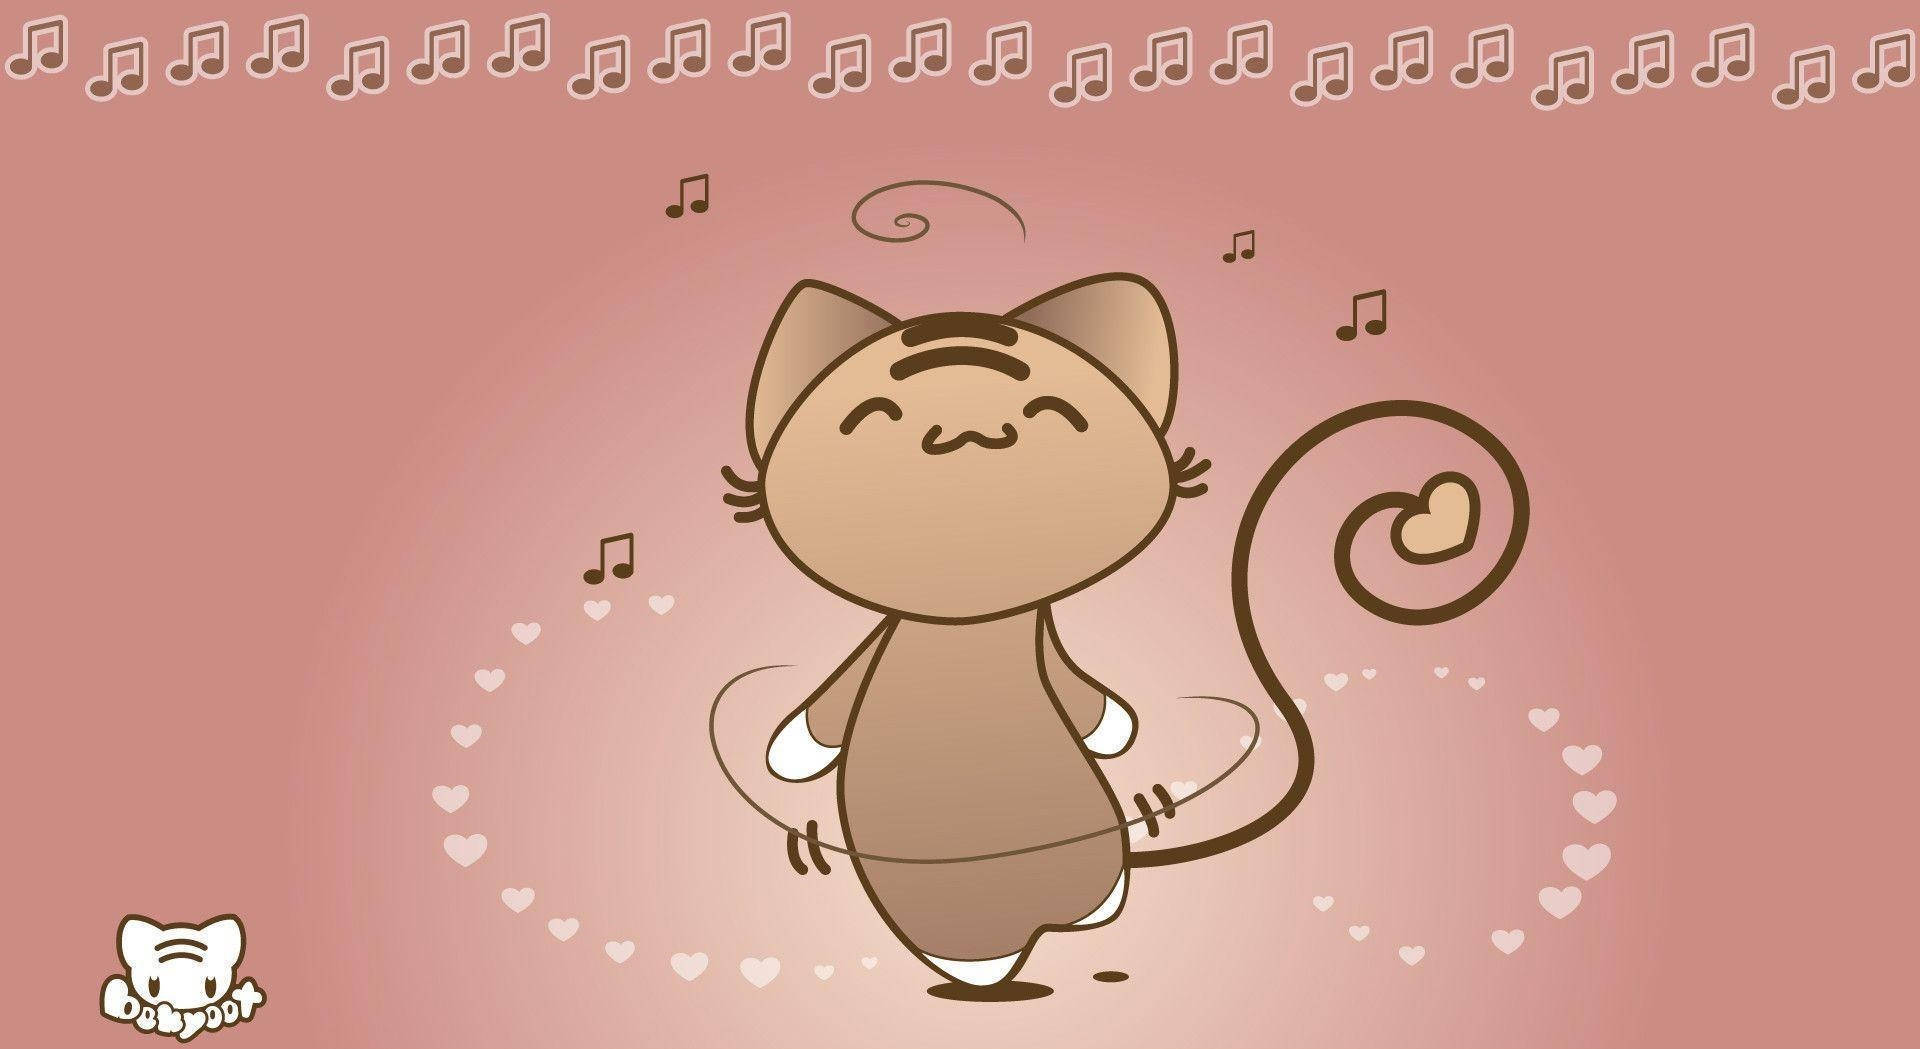 A Cat Is Dancing With Music Notes Background